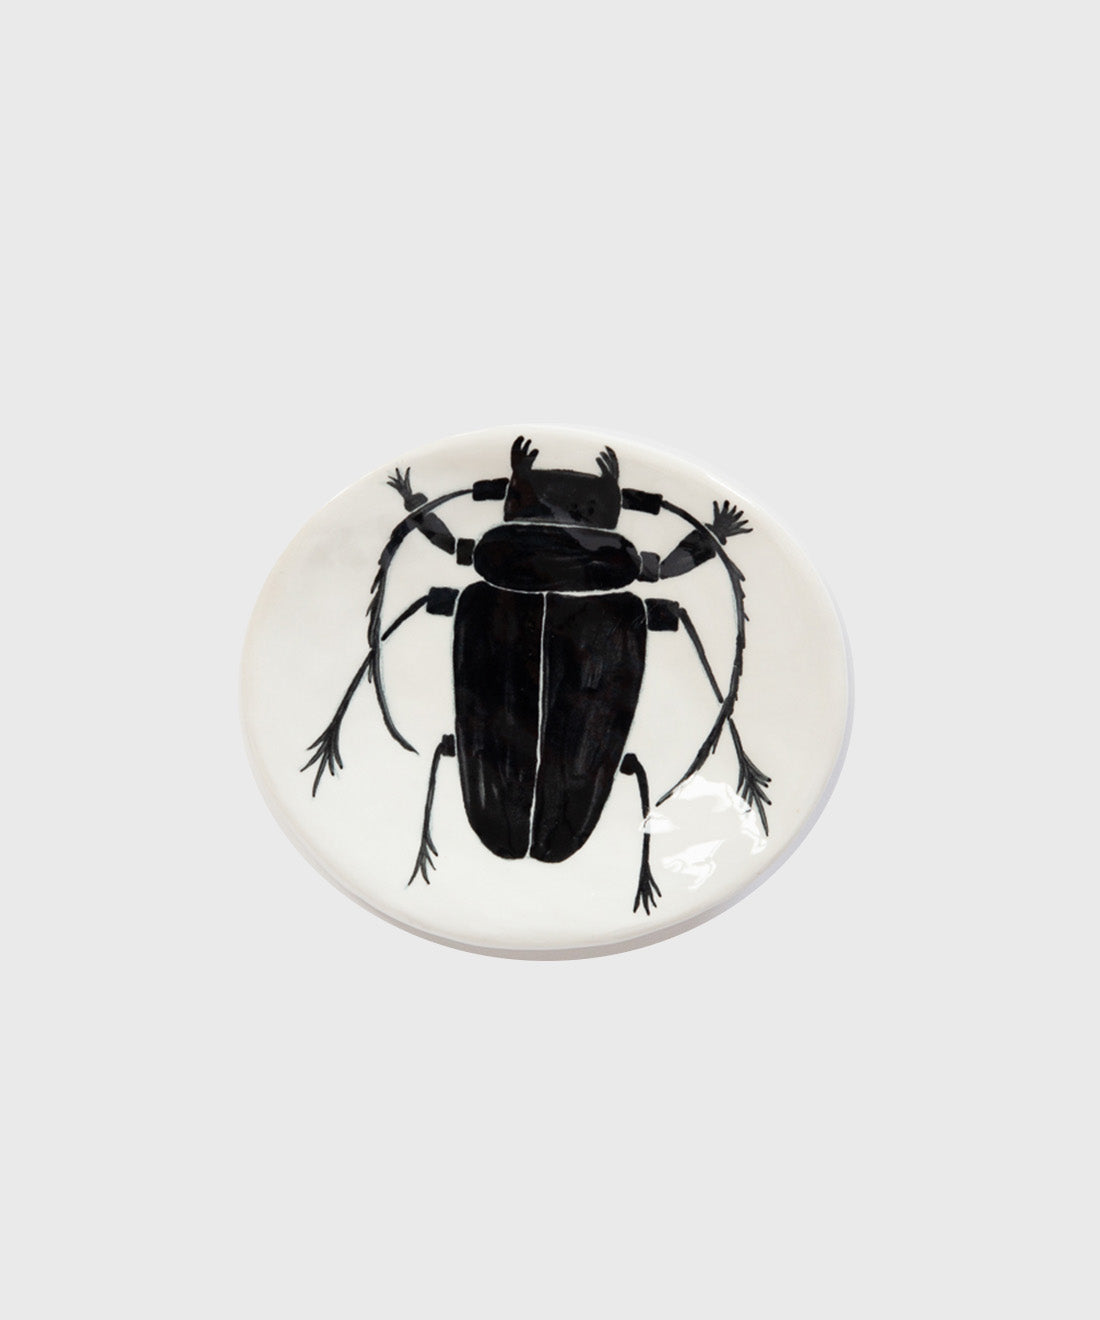 Beetle Small Oval Dish, 2